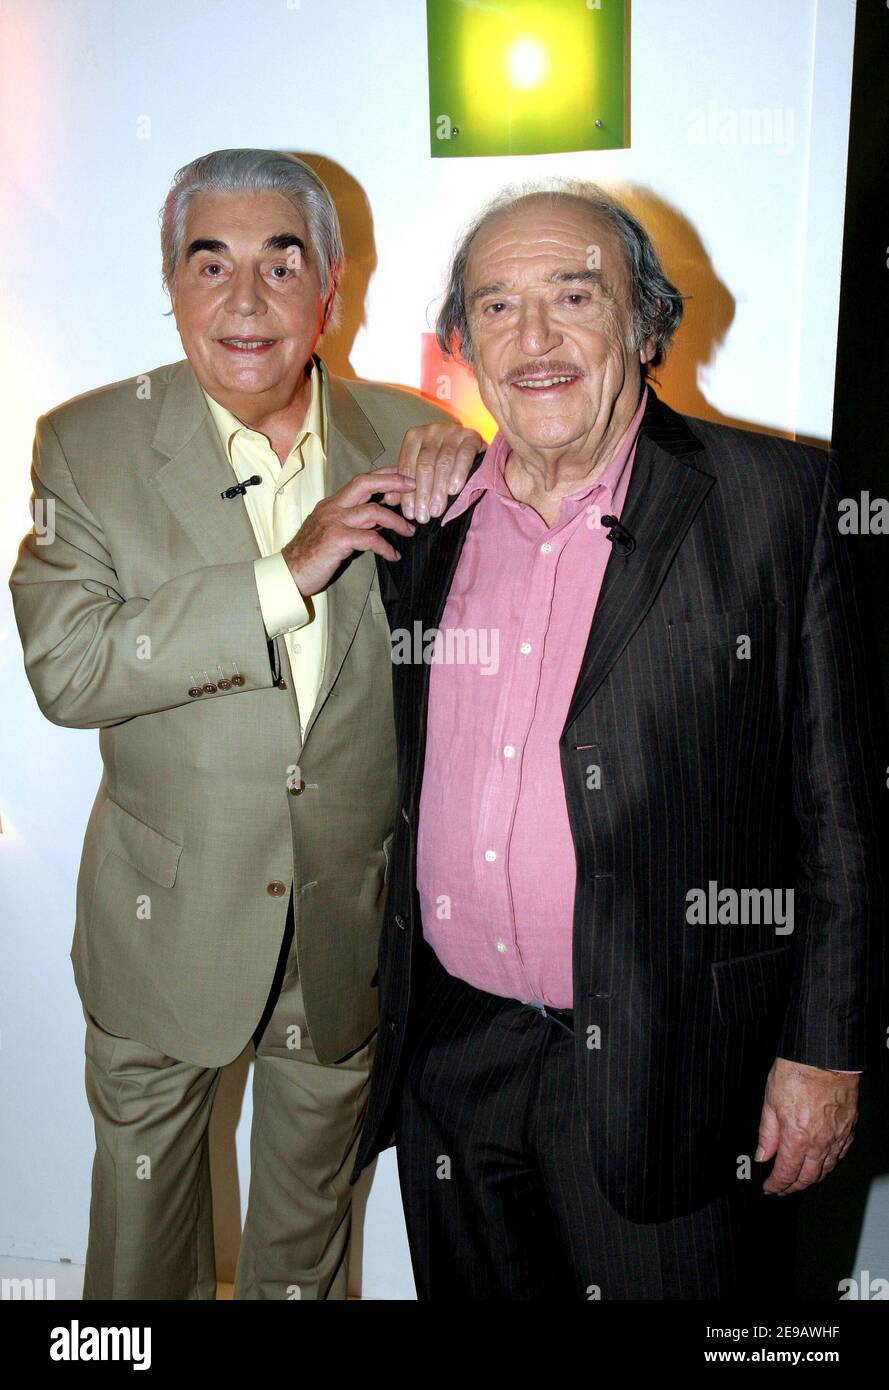 EXCLUSIVE. French humorists duo Roger Pierre (r) and Jean-Marc Thibault (l)  during the taping of 'TeleShopping' TV program at 'Plaine Saint Denis'  Studios near Paris, France on June 14, 2006. Photo by